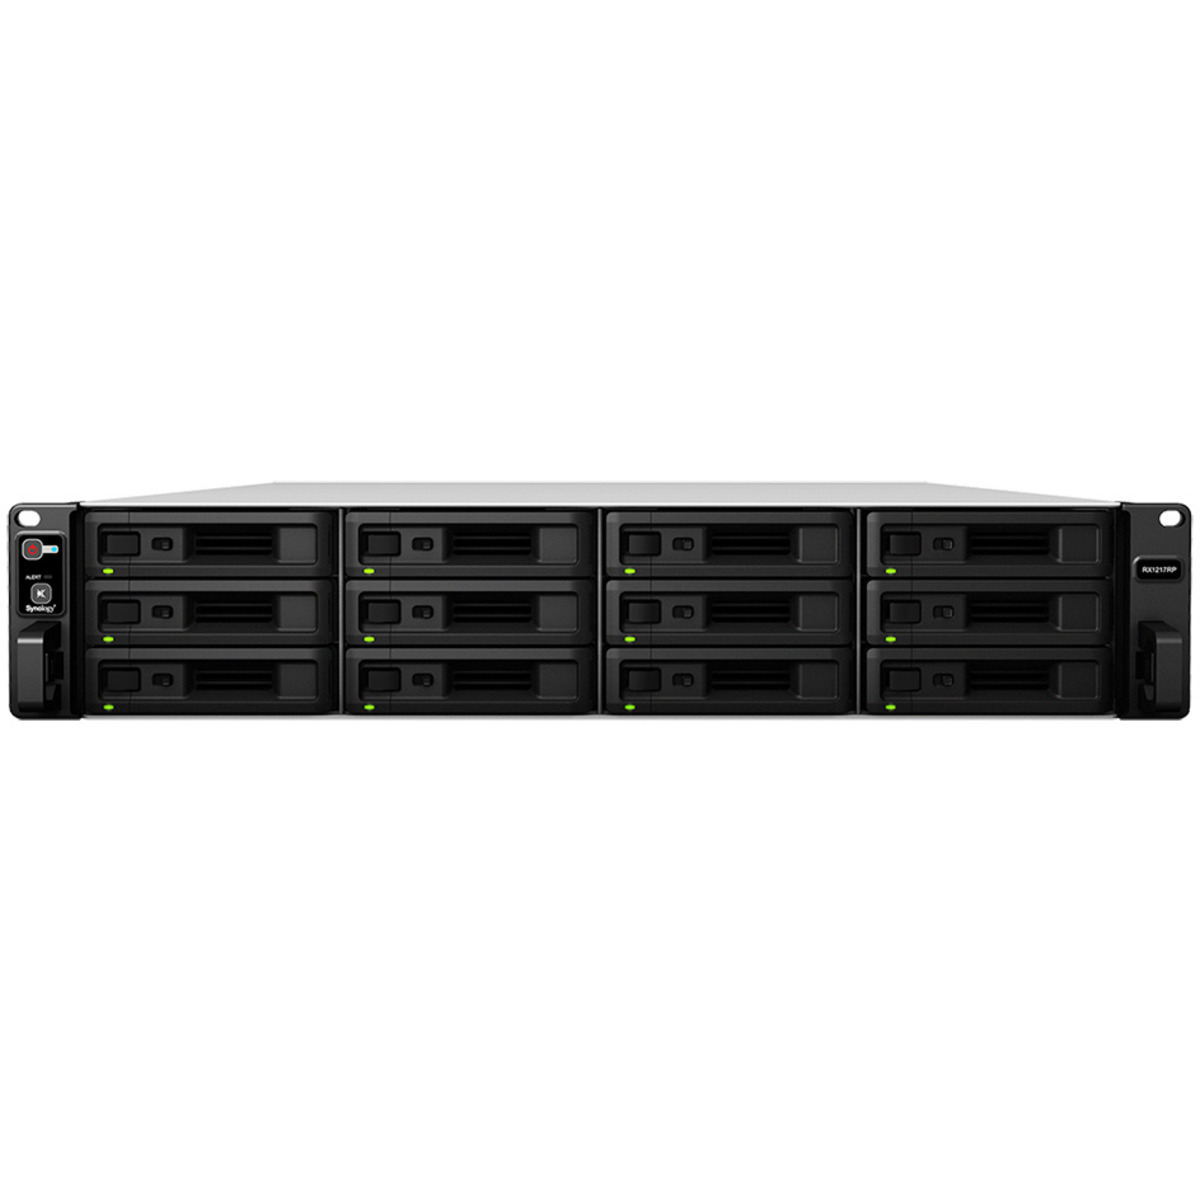 Synology RX1217 External Expansion Drive RackMount 12-Bay Large Business / Enterprise Expansion Enclosure Burn-In Tested Configurations RX1217 External Expansion Drive